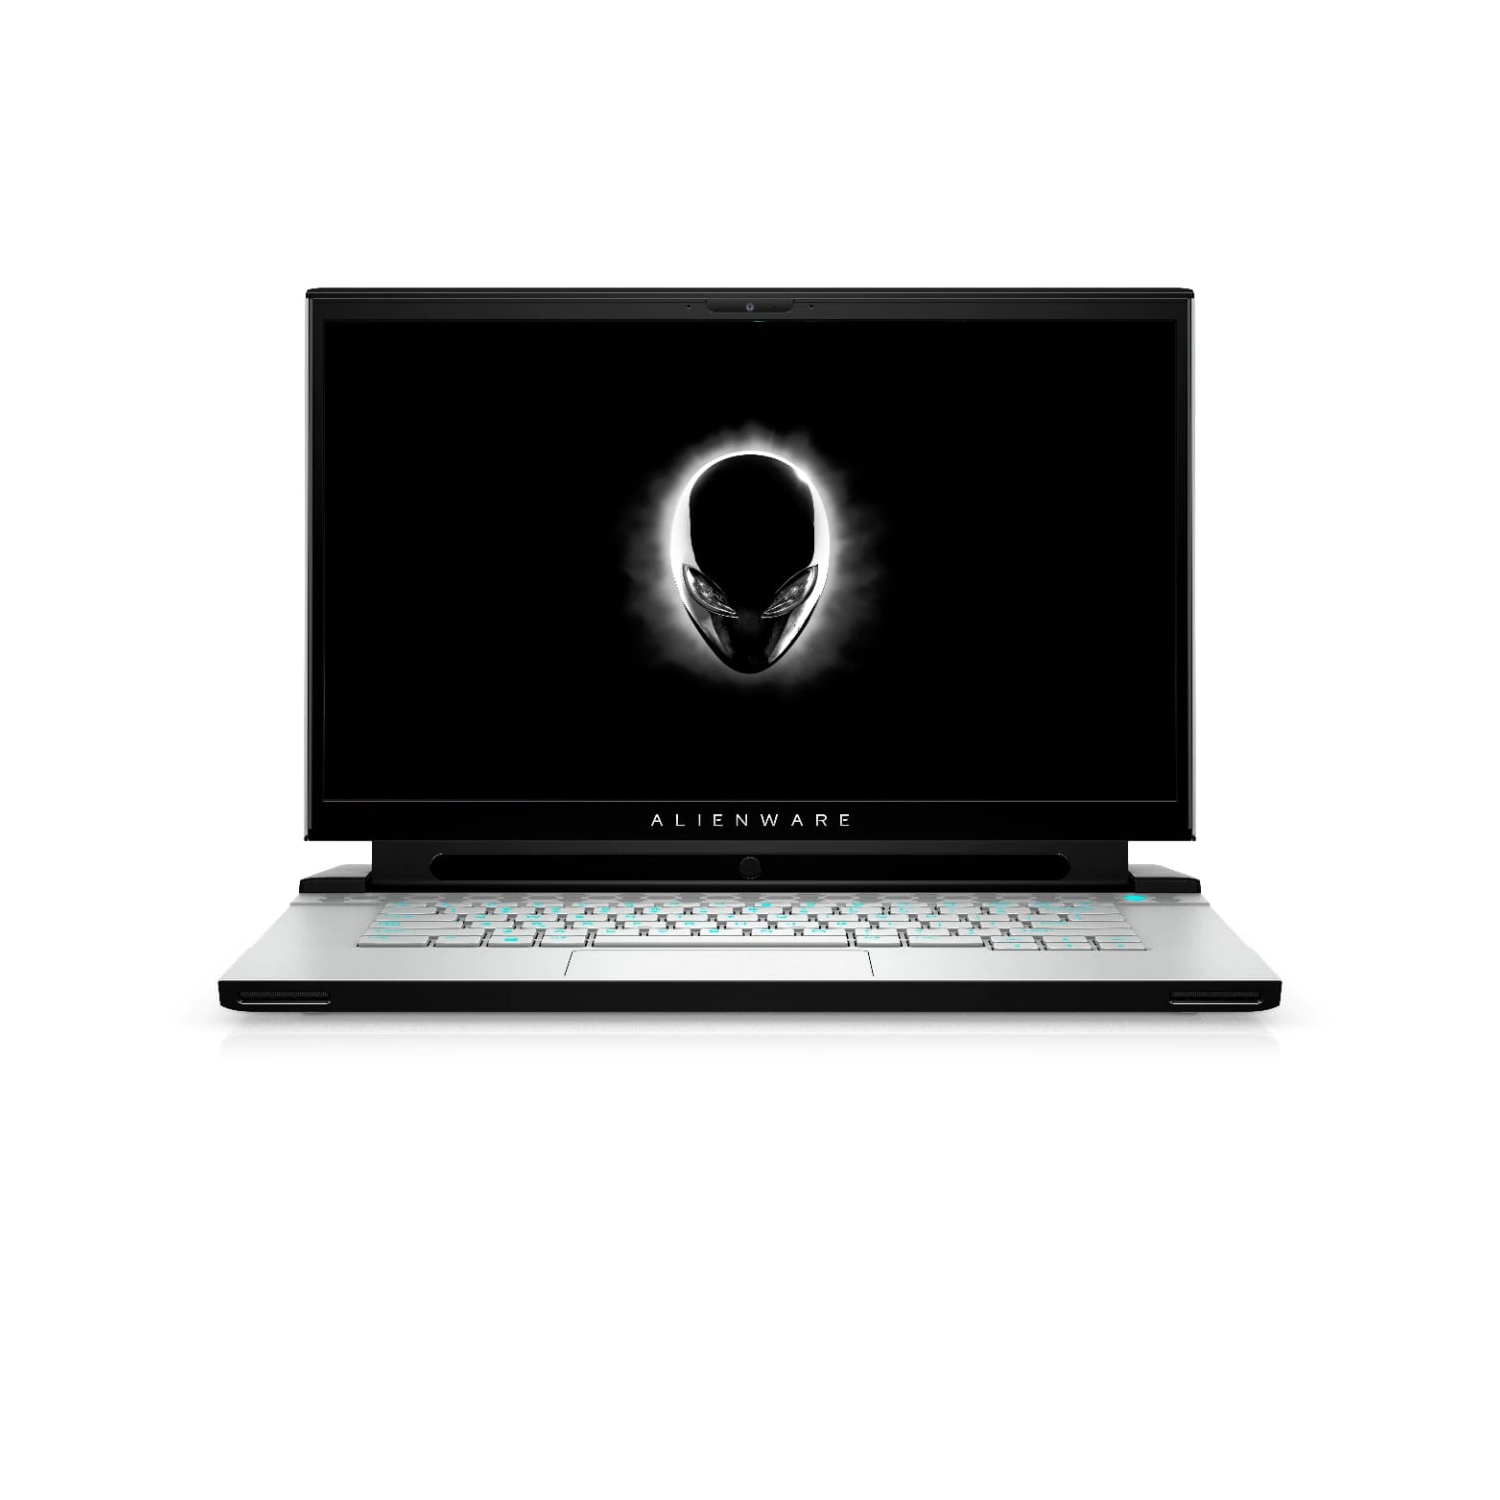 Refurbished (Excellent) - Dell Alienware m15 R3 Gaming Laptop (2020), 15.6" FHD, Core i7, 1TB SSD, 32GB RAM, 2080 SUPER, 8 Cores @ 5.1 GHz, 10th Gen CPU Certified